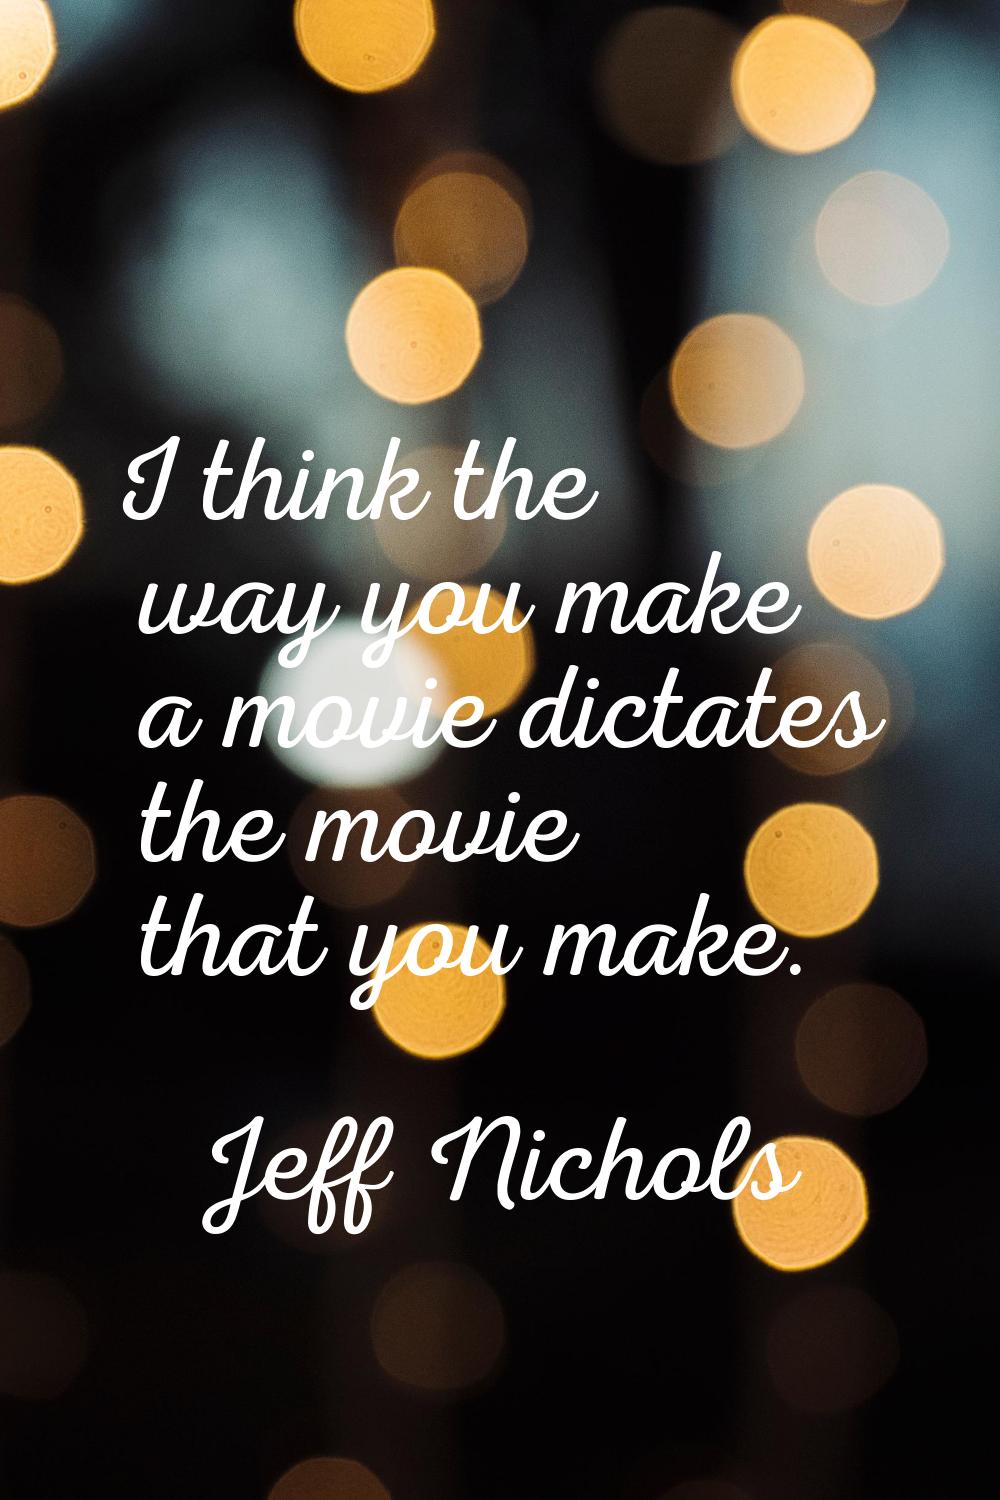 I think the way you make a movie dictates the movie that you make.